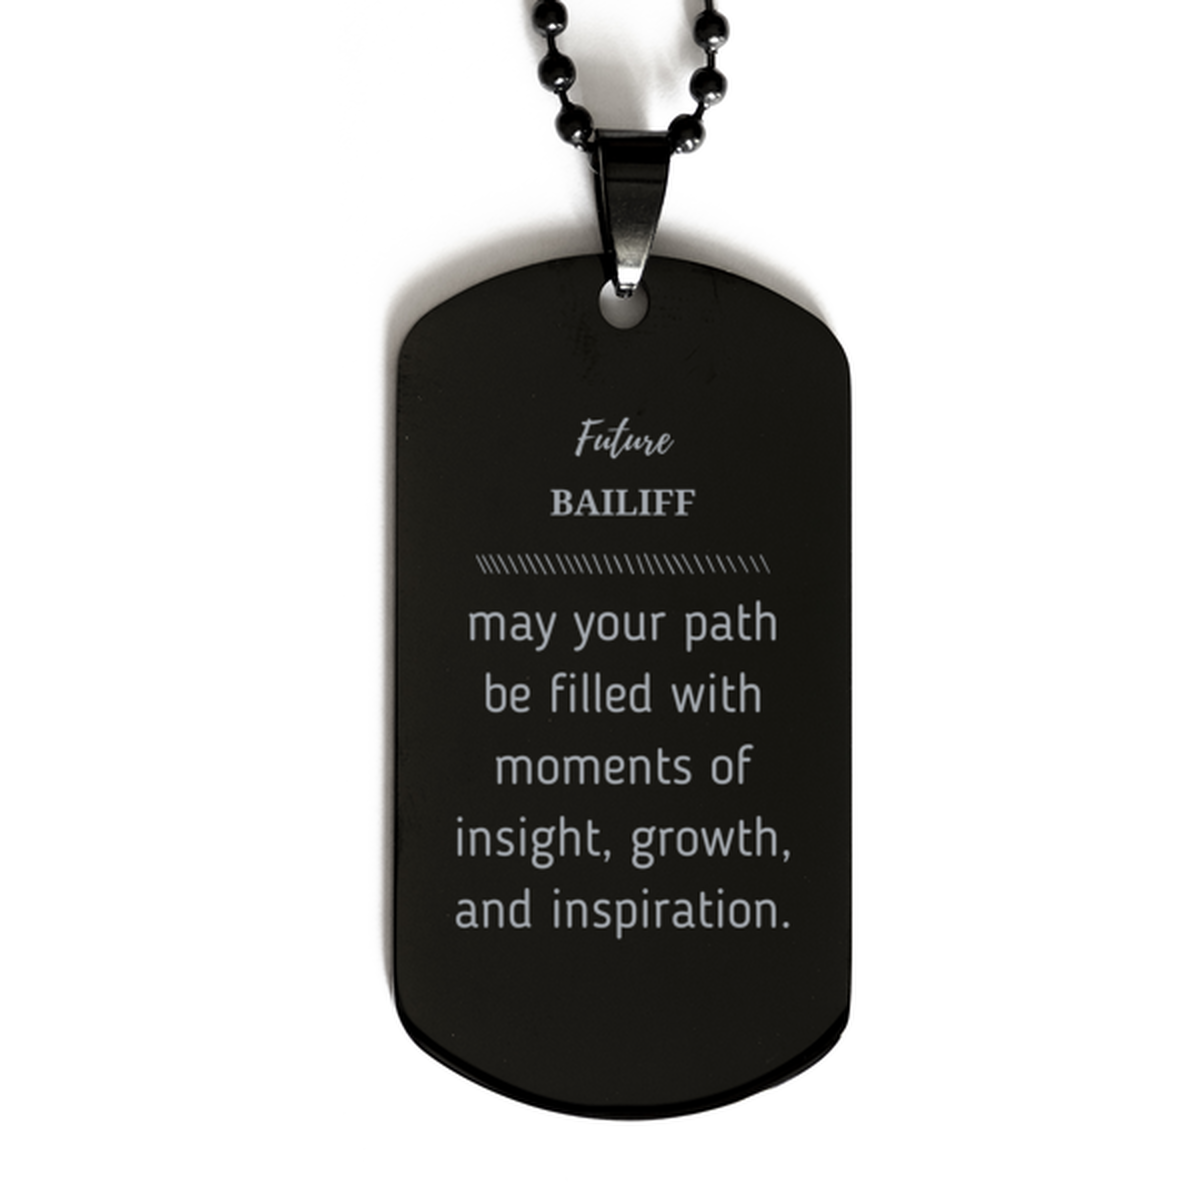 Future Bailiff Gifts, May your path be filled with moments of insight, Graduation Gifts for New Bailiff, Christmas Unique Black Dog Tag For Men, Women, Friends